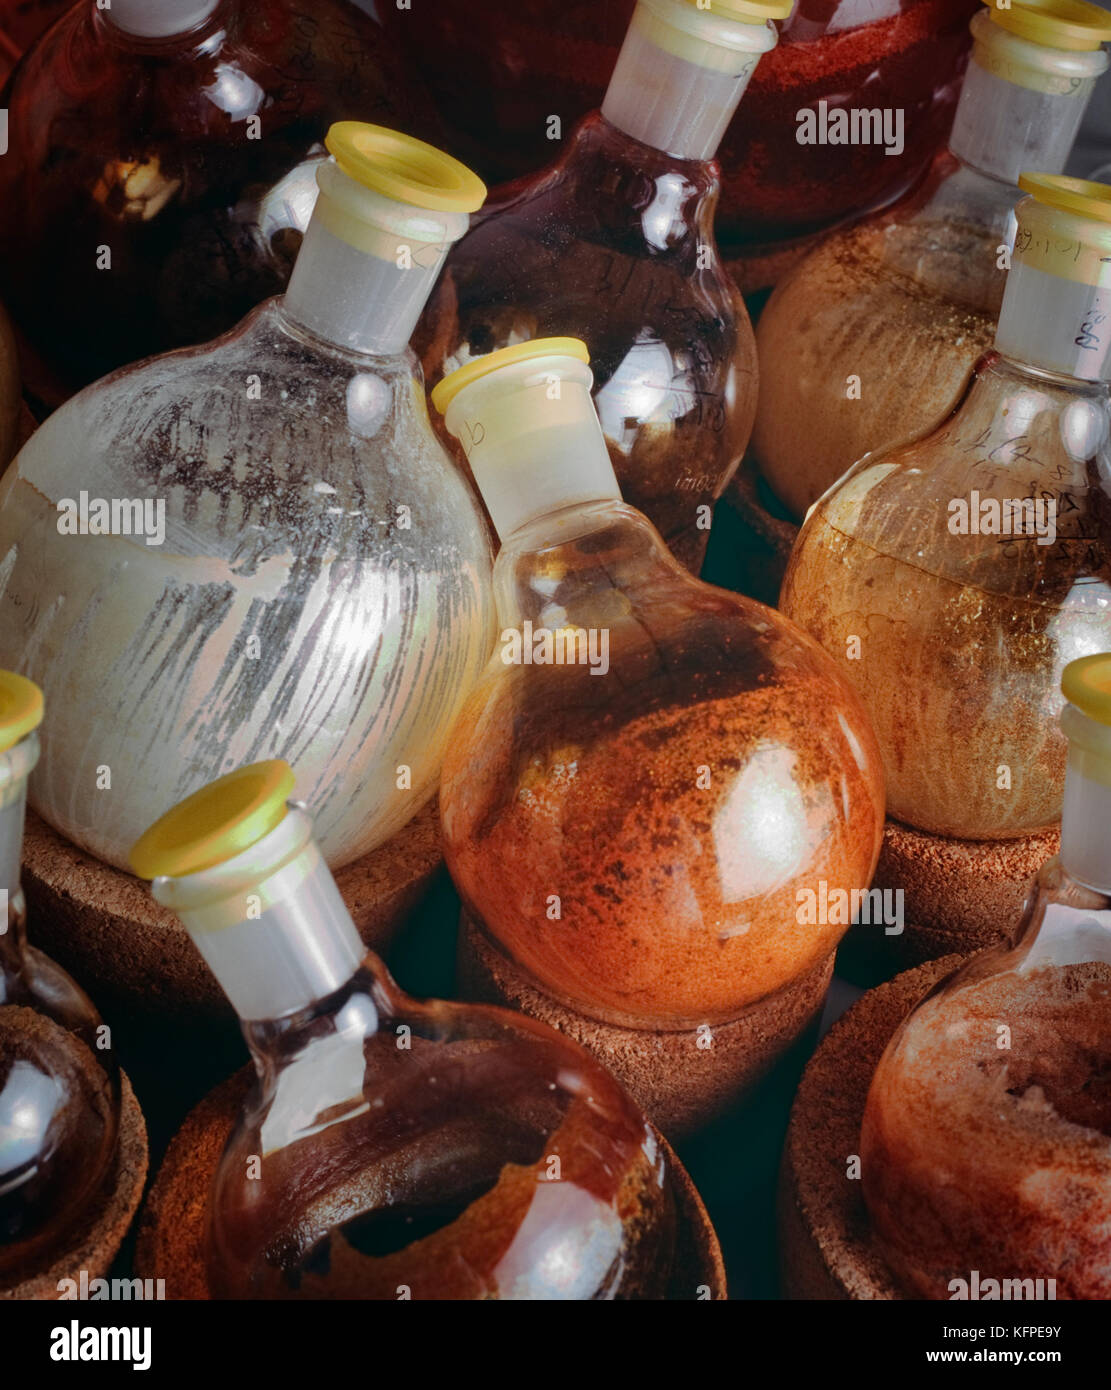 Flasks of residues from experiments in a pharmacological biochemistry laboratory to be investigated for future useful compounds. Stock Photo